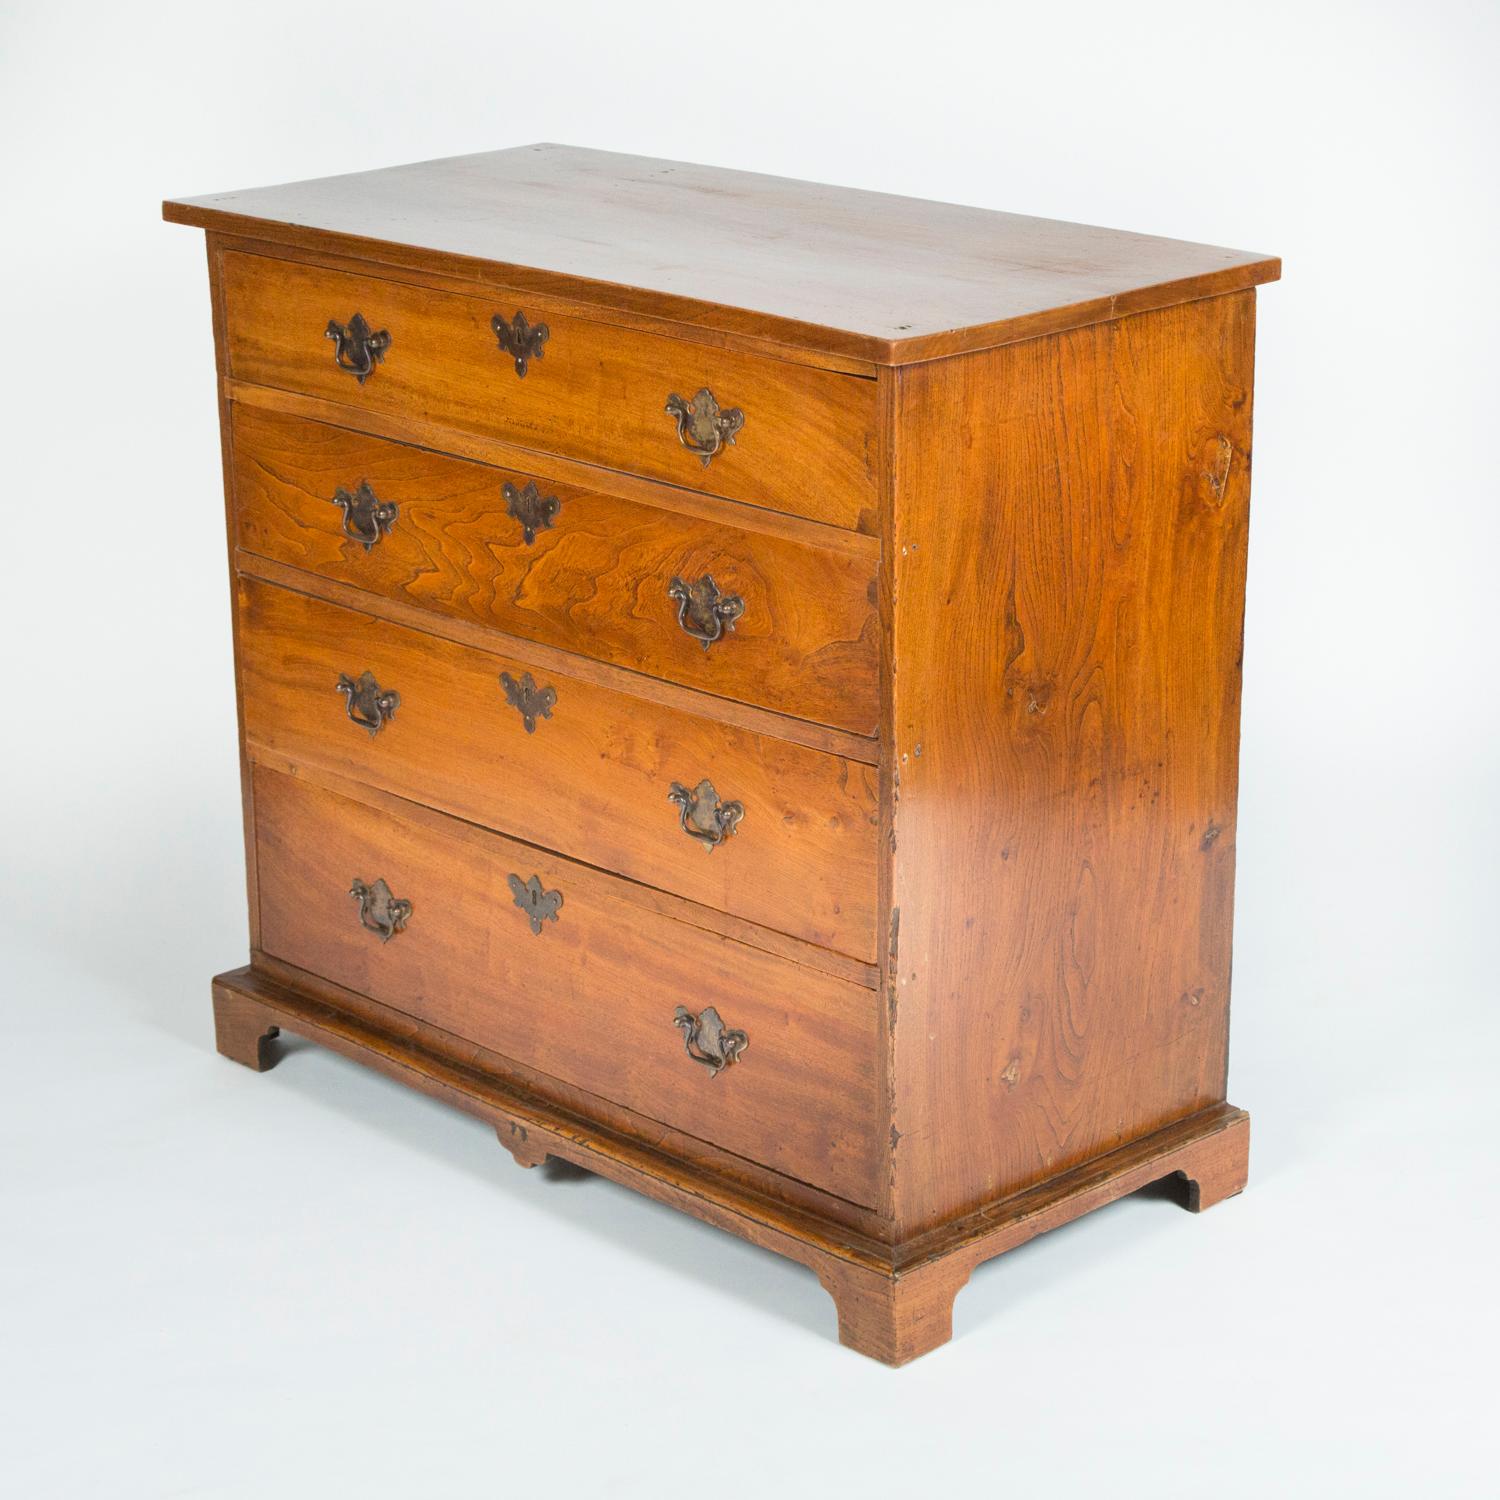 An Anglo-Indian teak 4 drawer chest of drawers with iron handles and escutcheons, circa 1910.

Measures: Height 89 cm 35 in
Width 98 cm 38.5 in
Depth 48.5 cm 19 in.